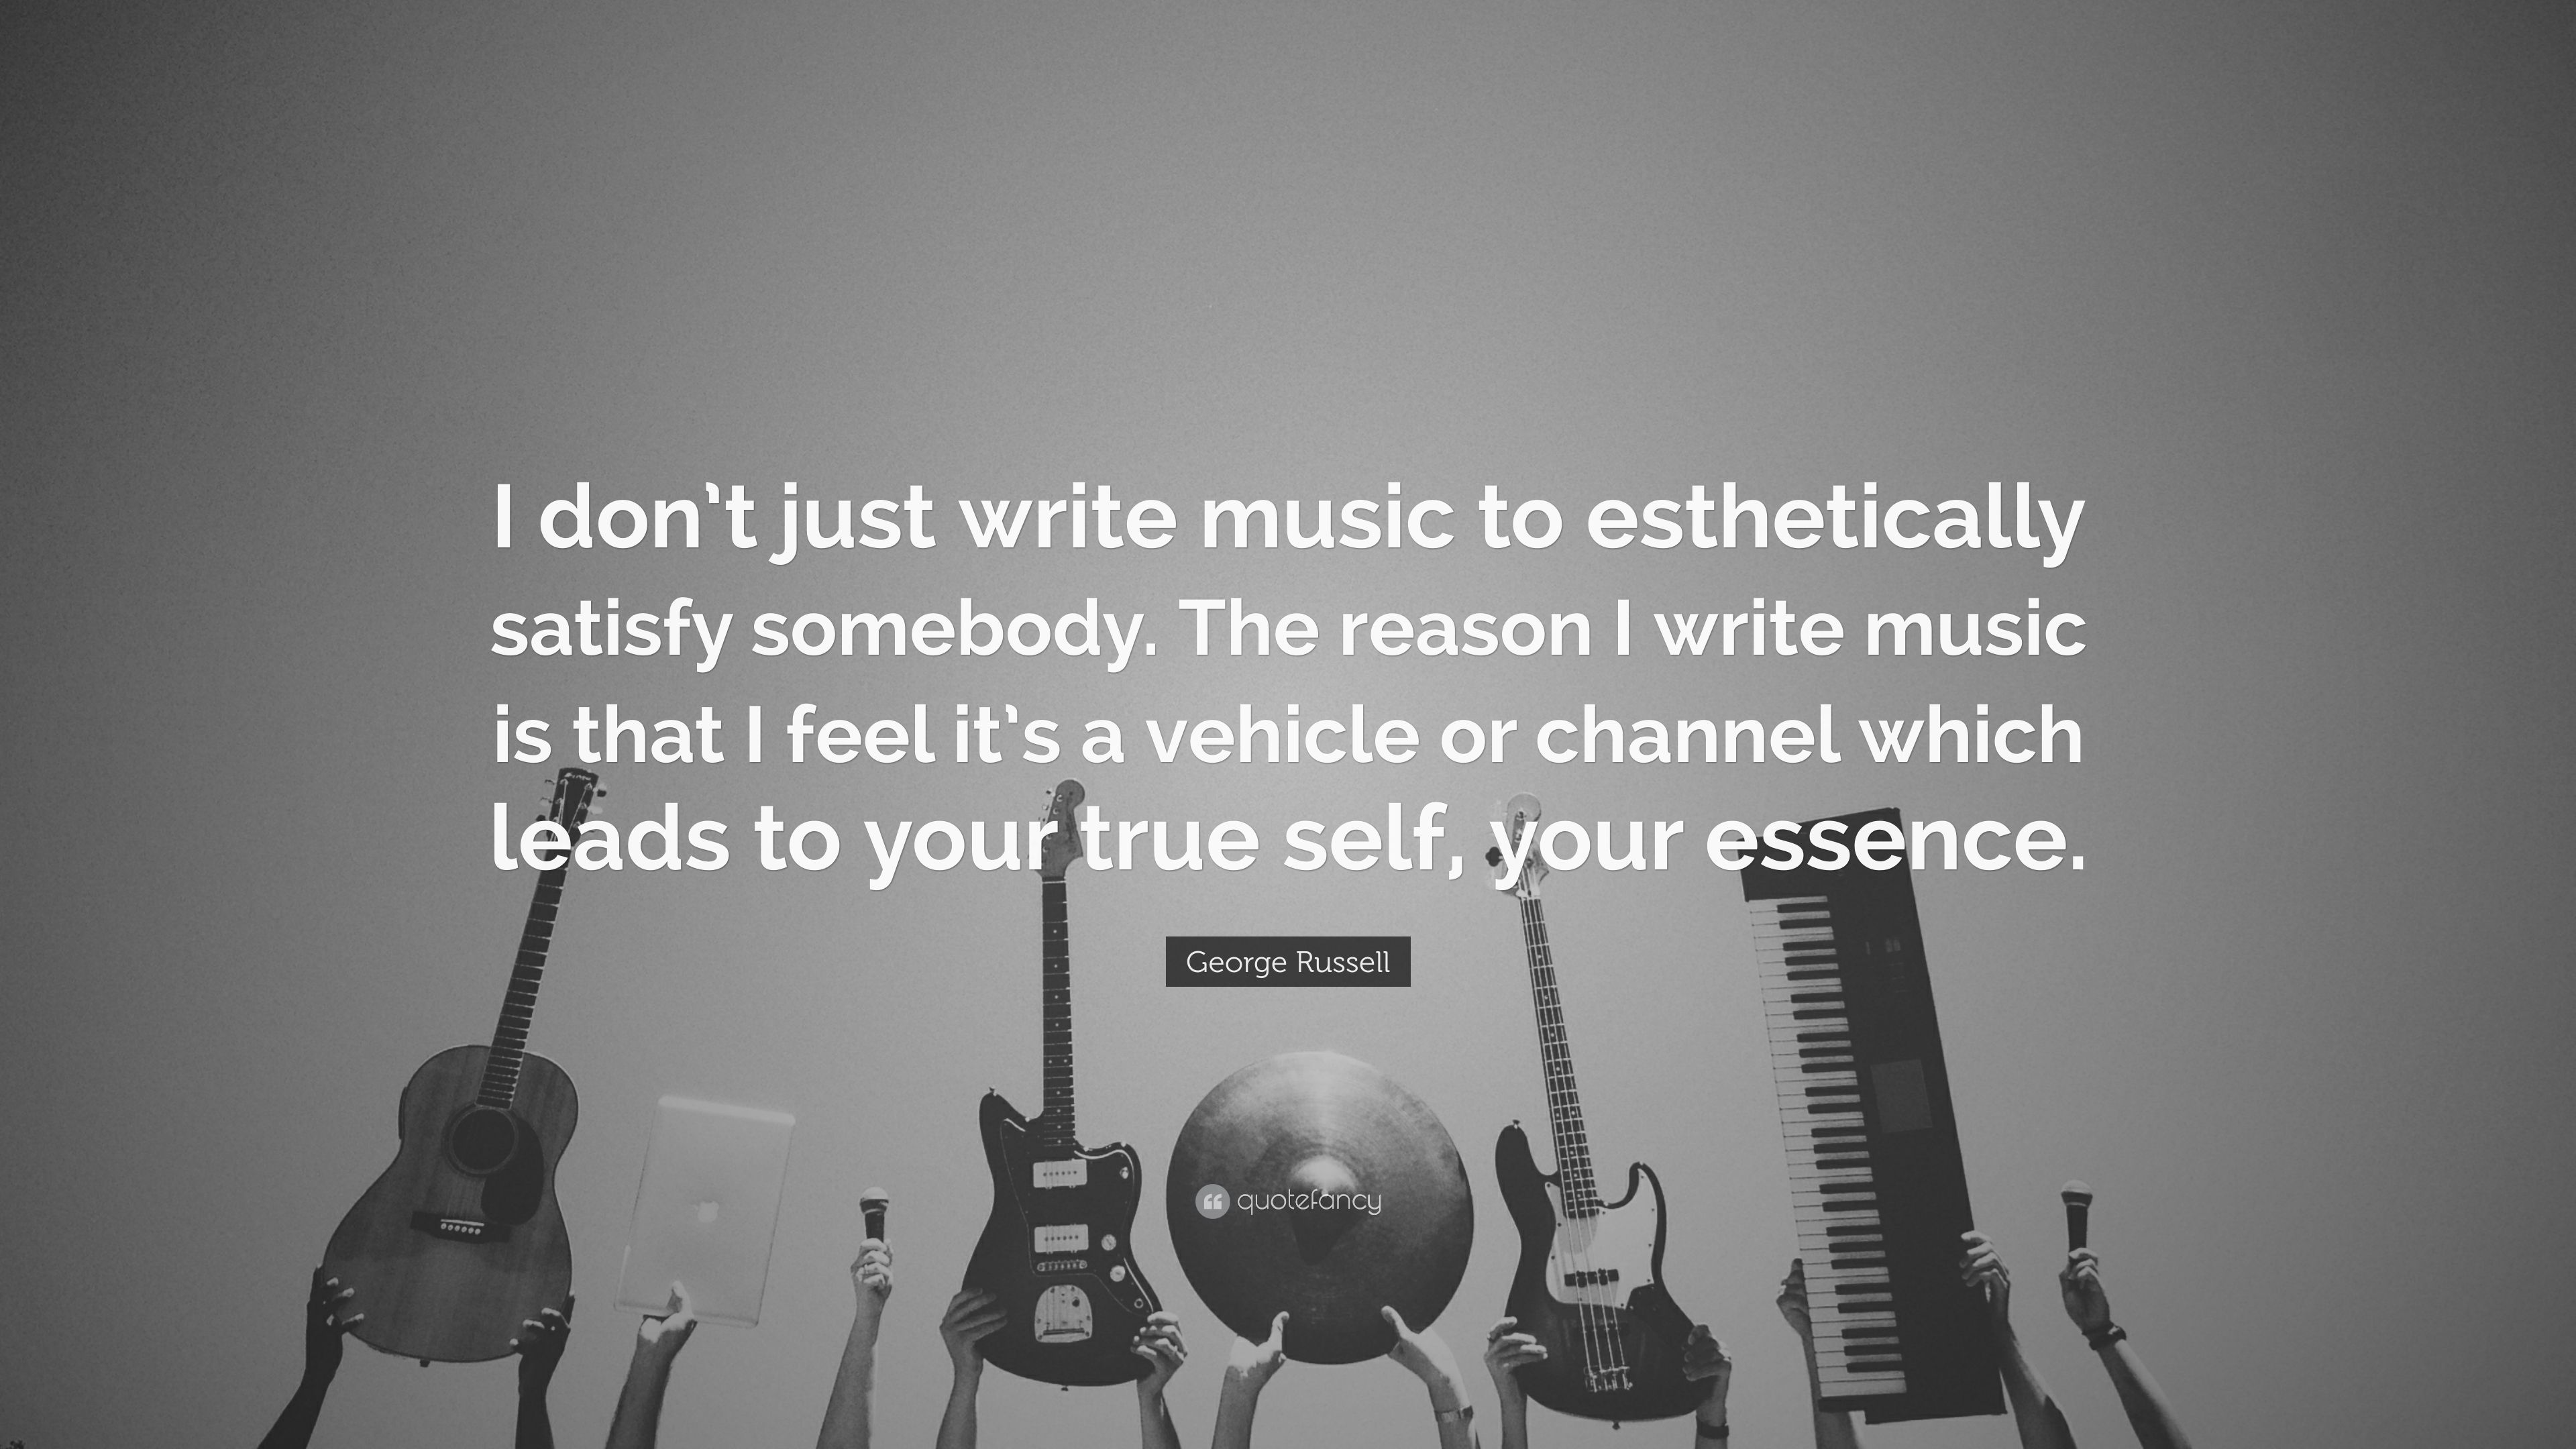 George Russell Quote: “I don't just write music to esthetically